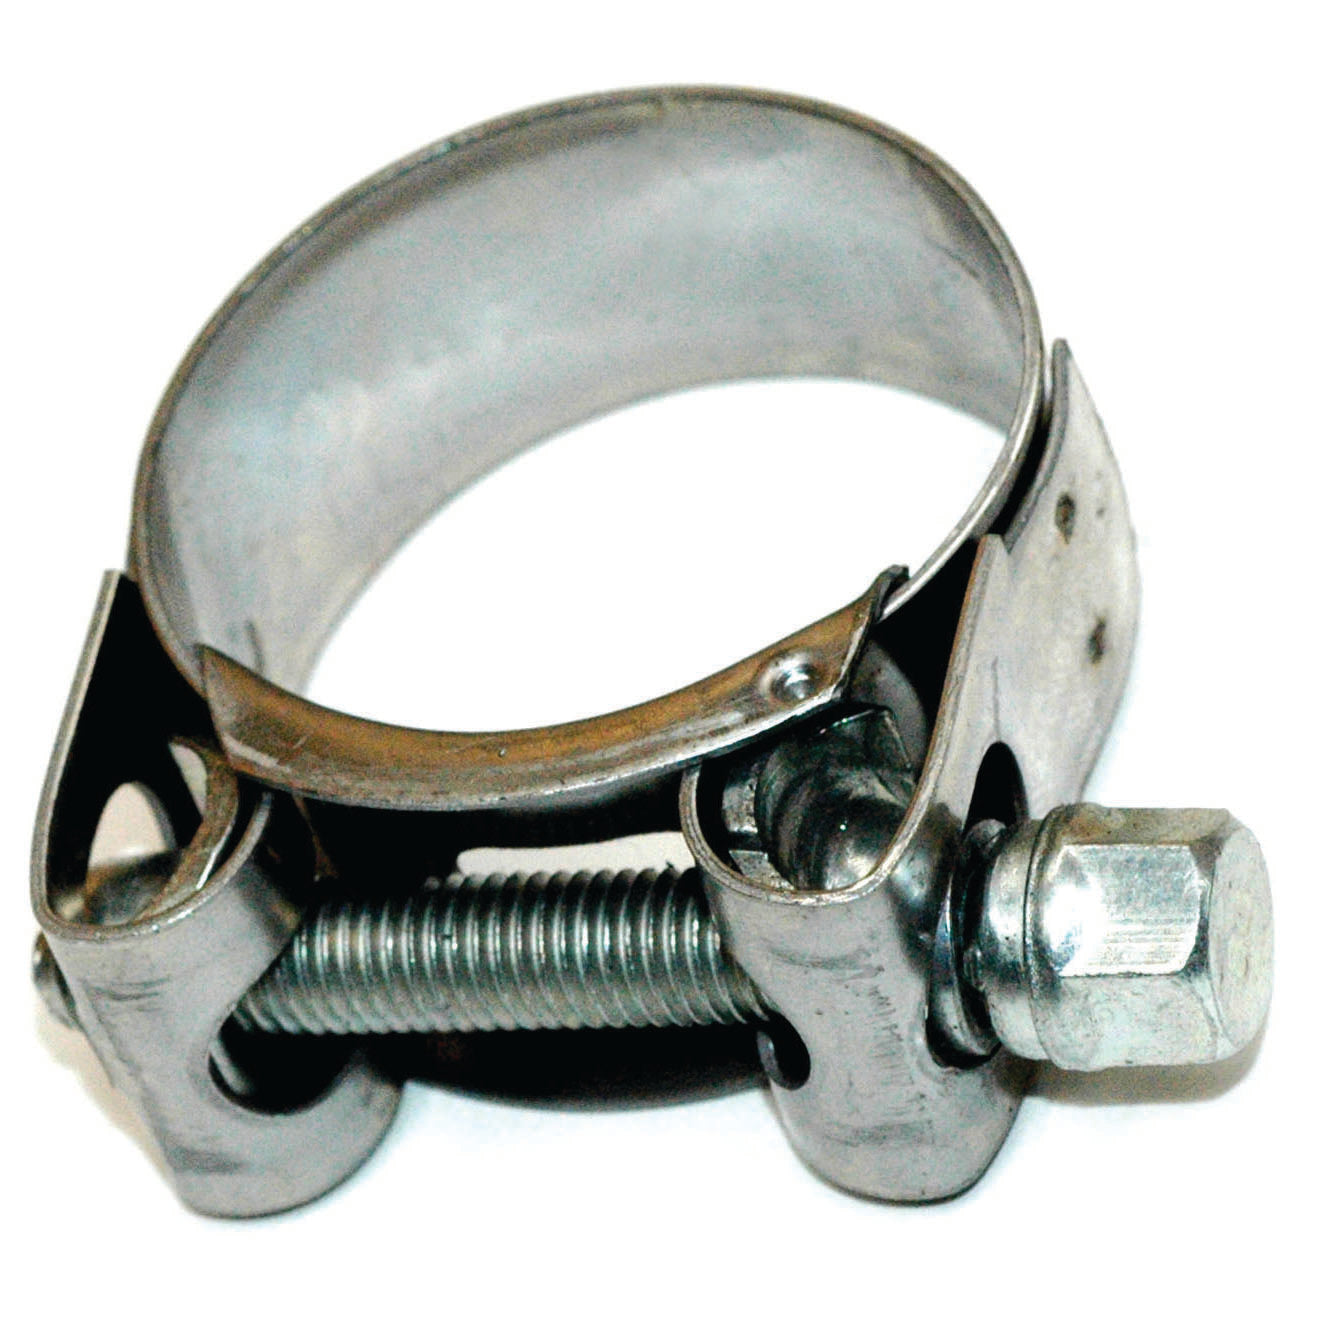 Stainless steel heavy duty T Bolt clamp